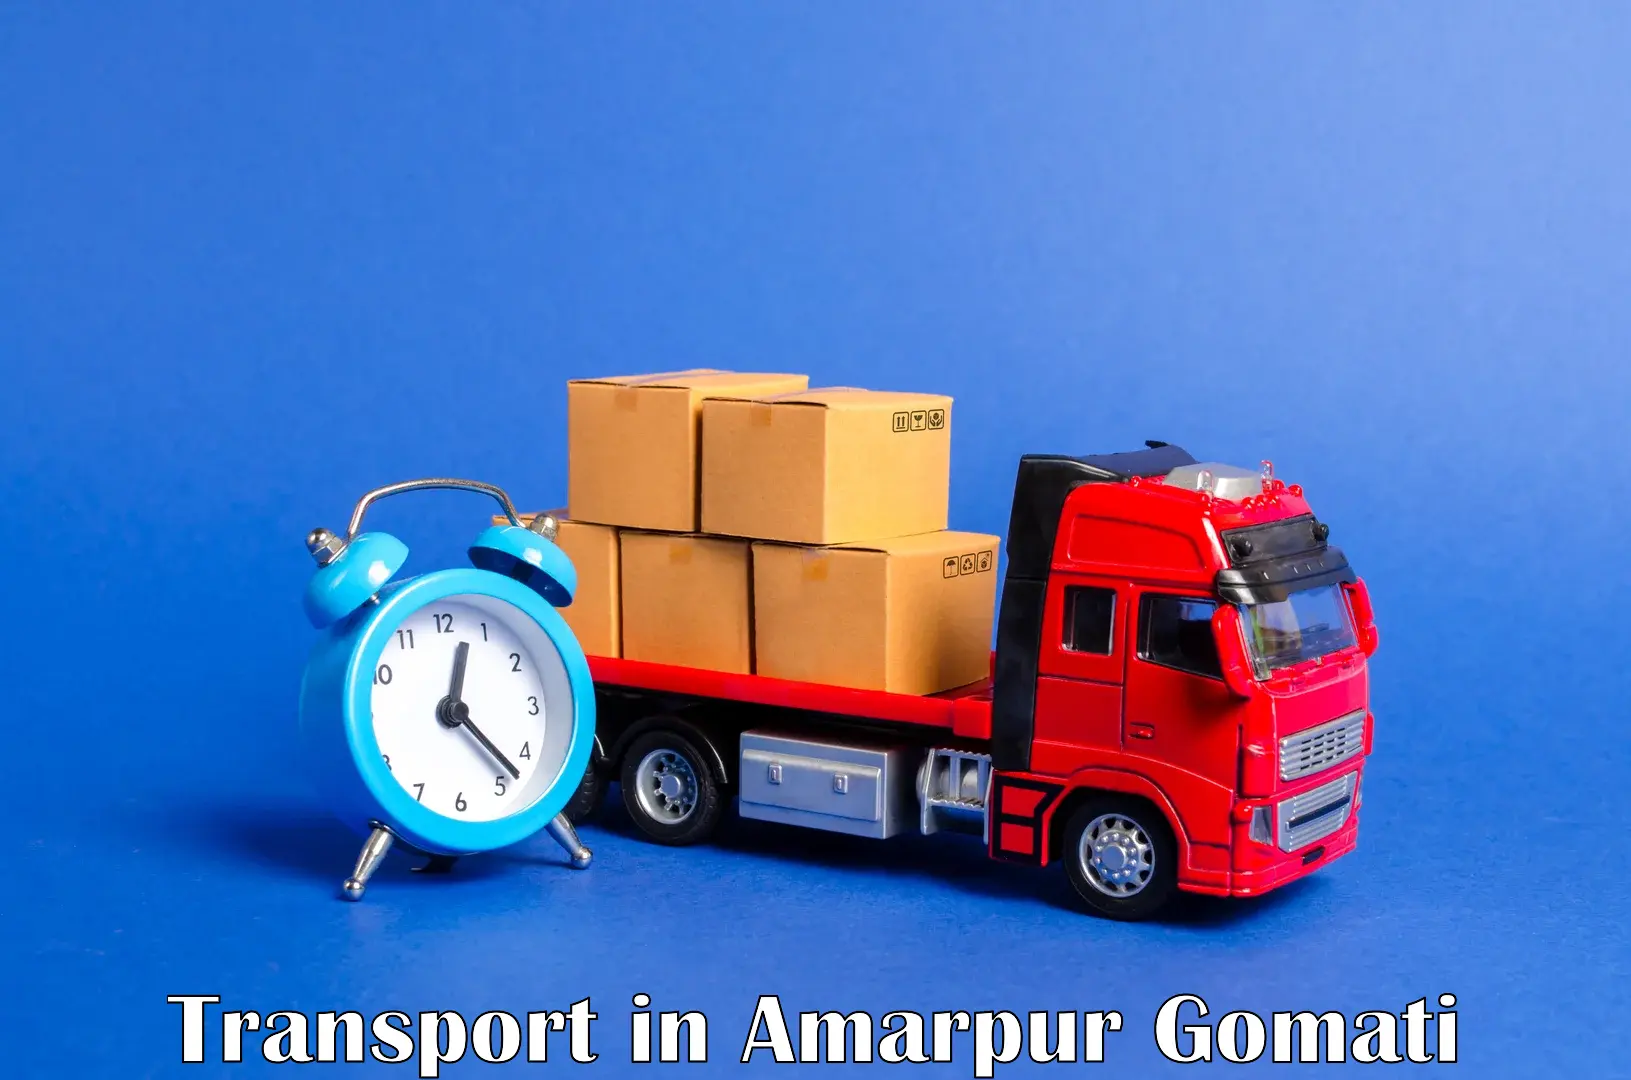 Package delivery services in Amarpur Gomati